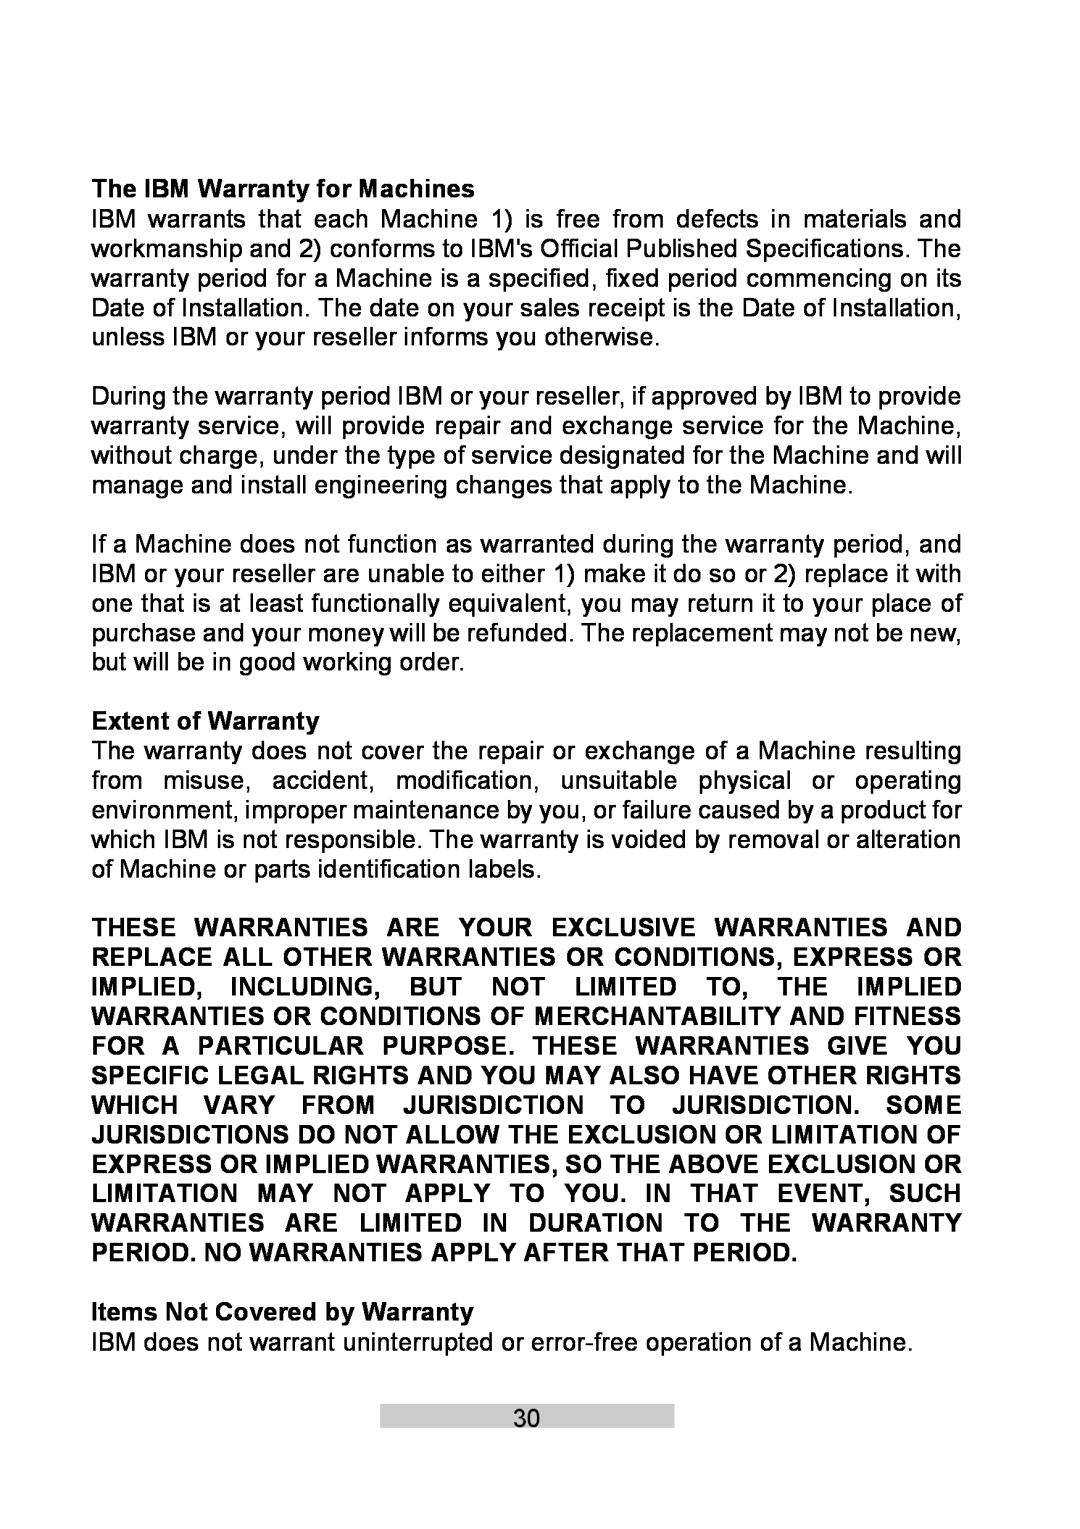 IBM T86A system manual The IBM Warranty for Machines, Extent of Warranty, Items Not Covered by Warranty 